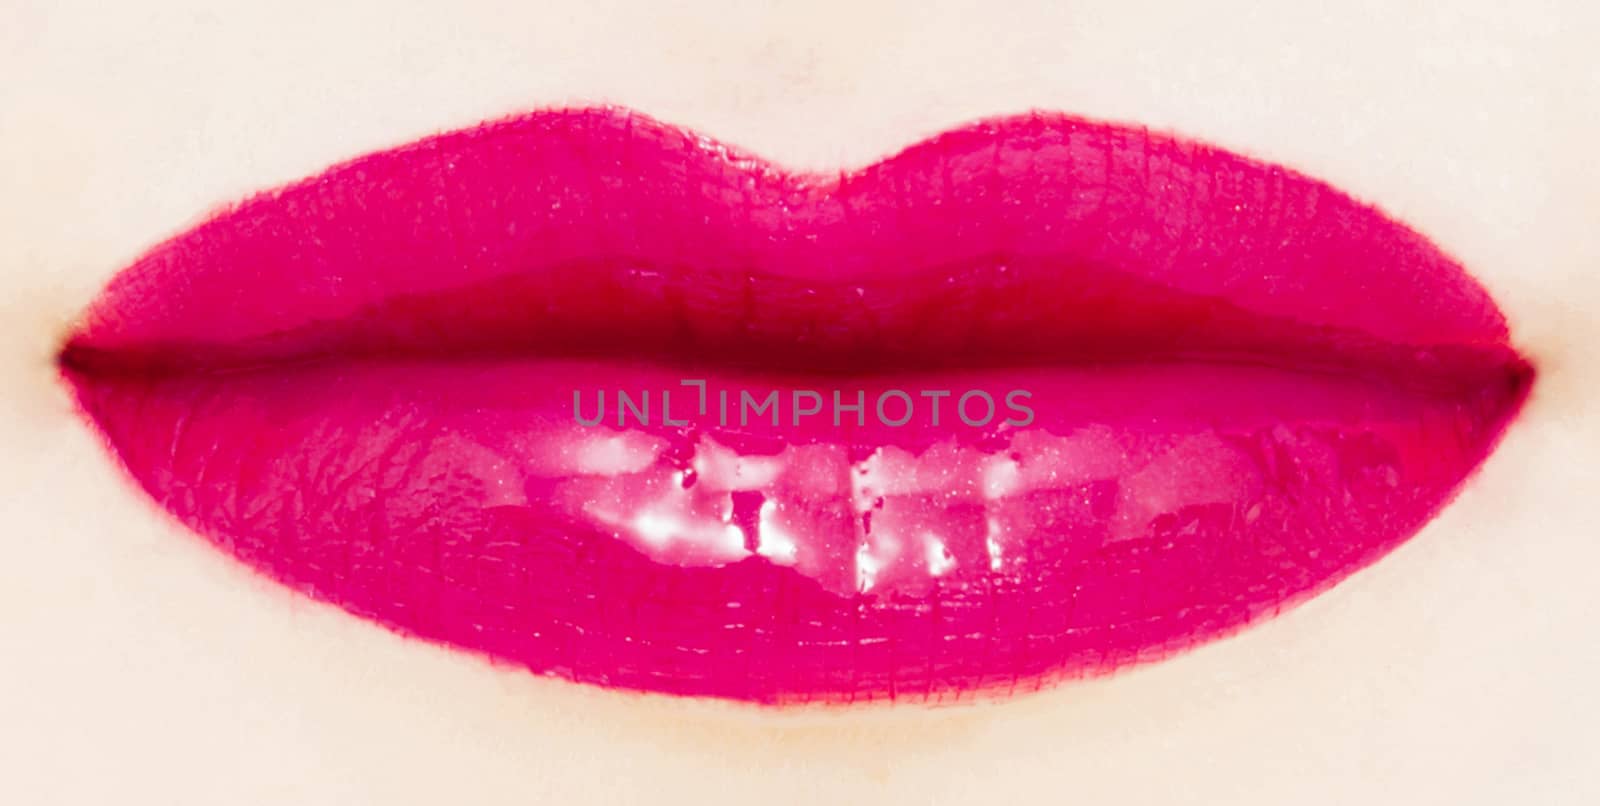 Female lips with glossy lipstick or lip gloss for make-up and be by Anneleven